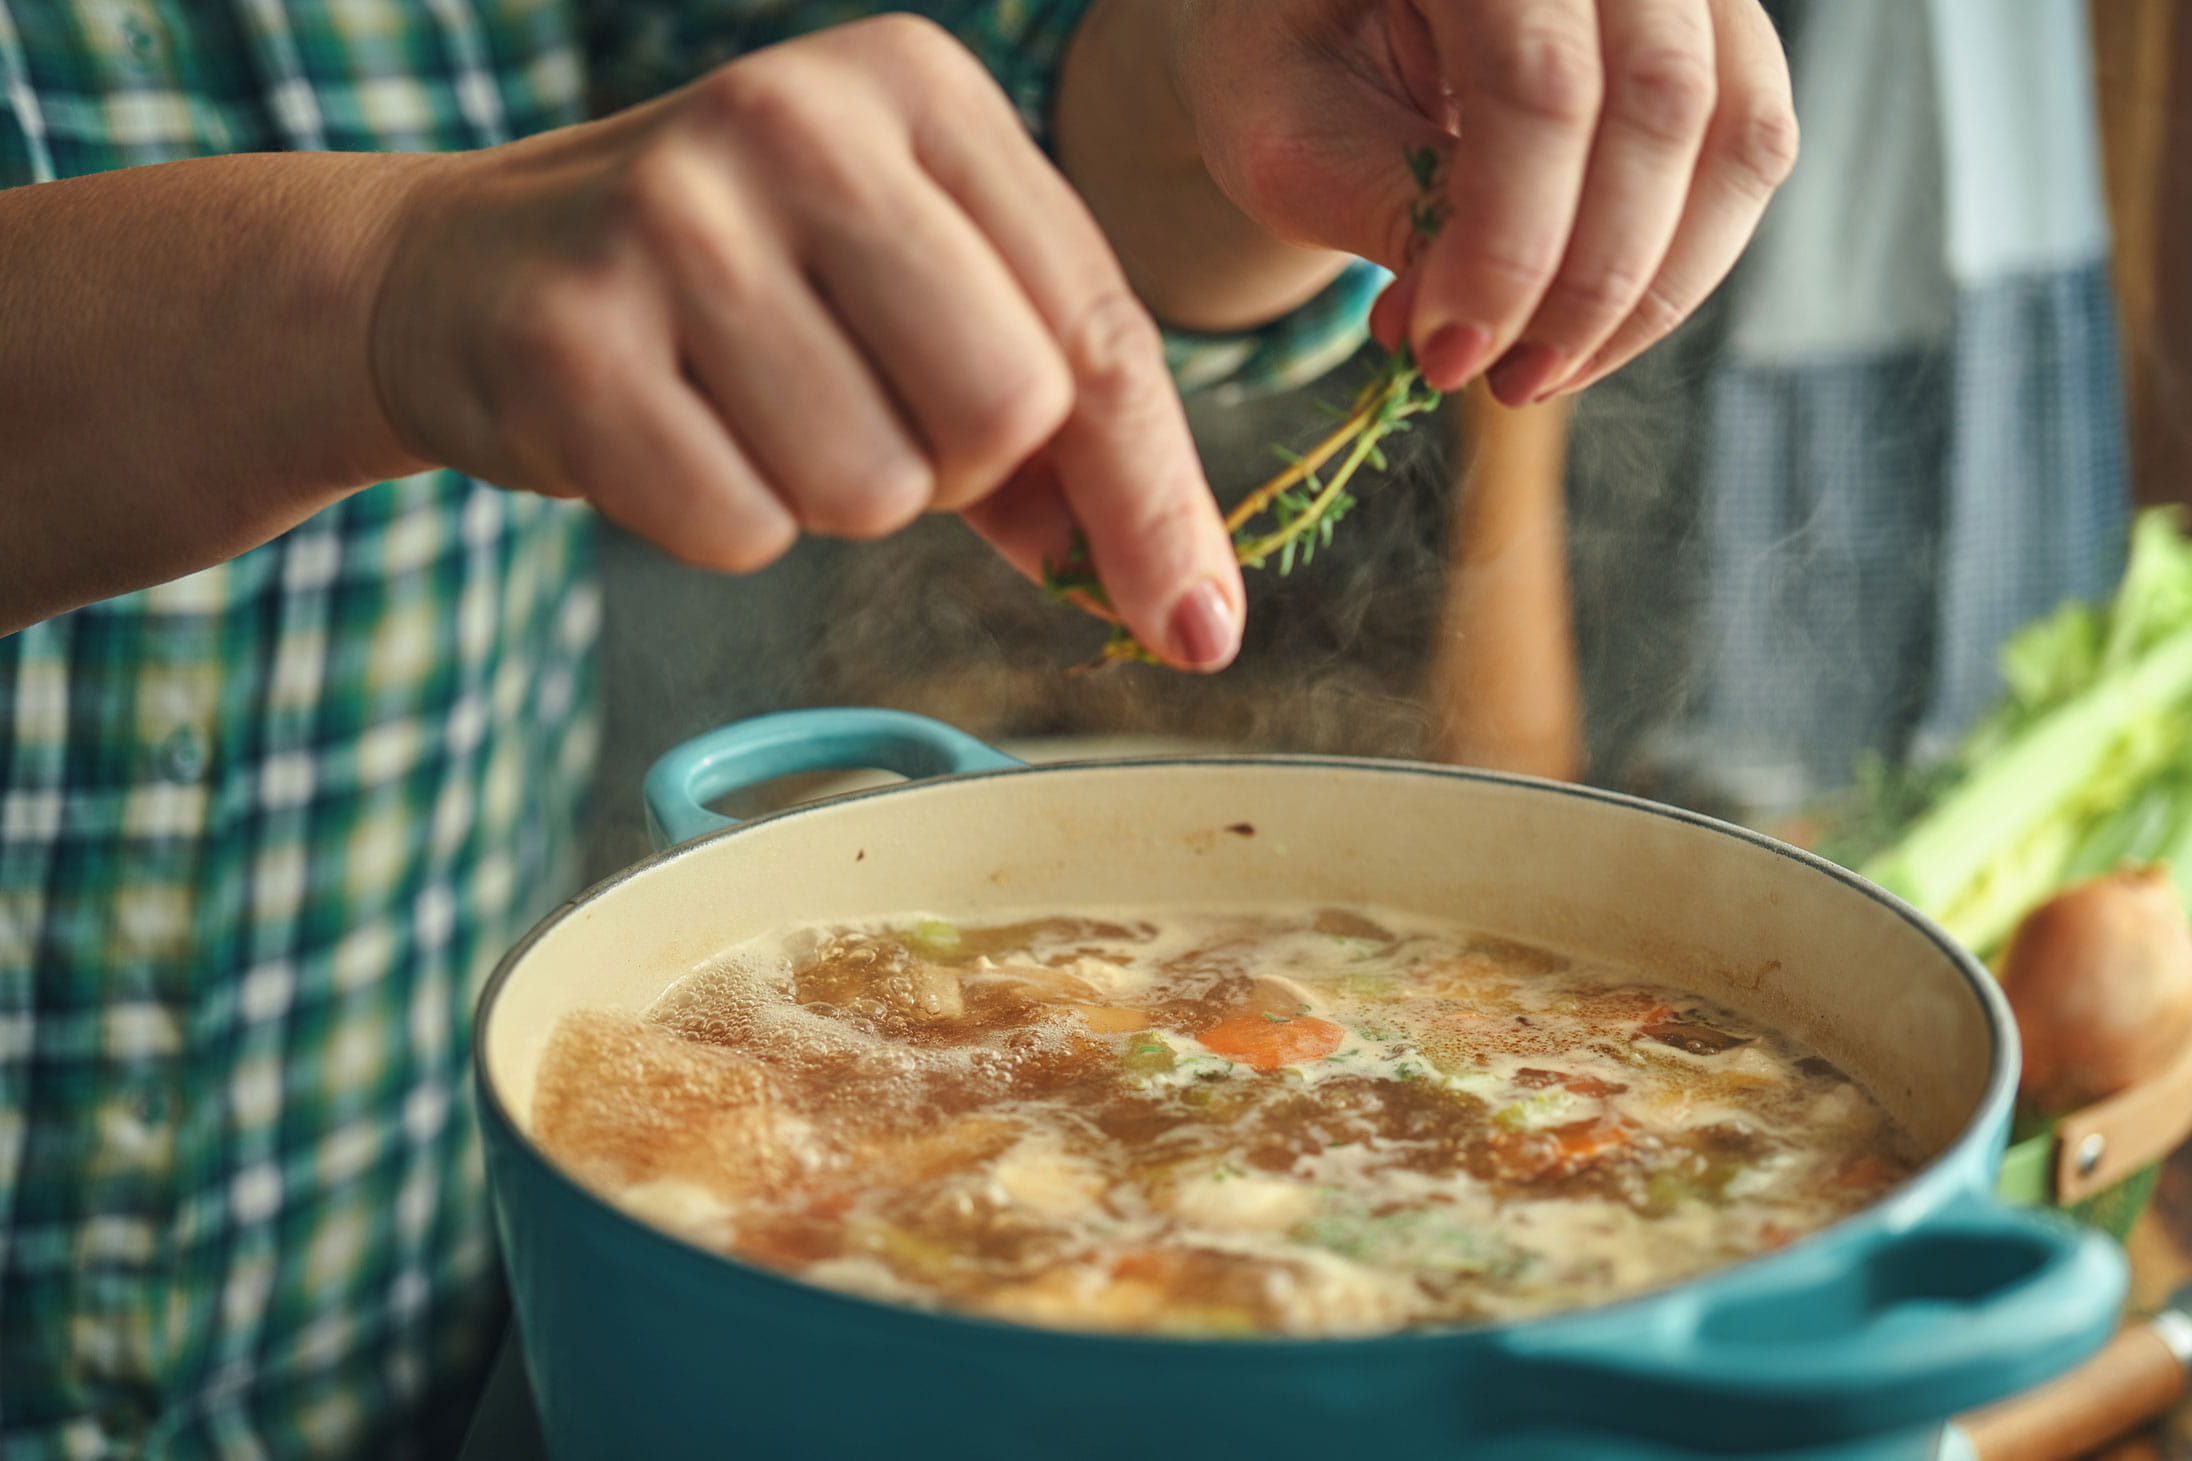 A person making broth